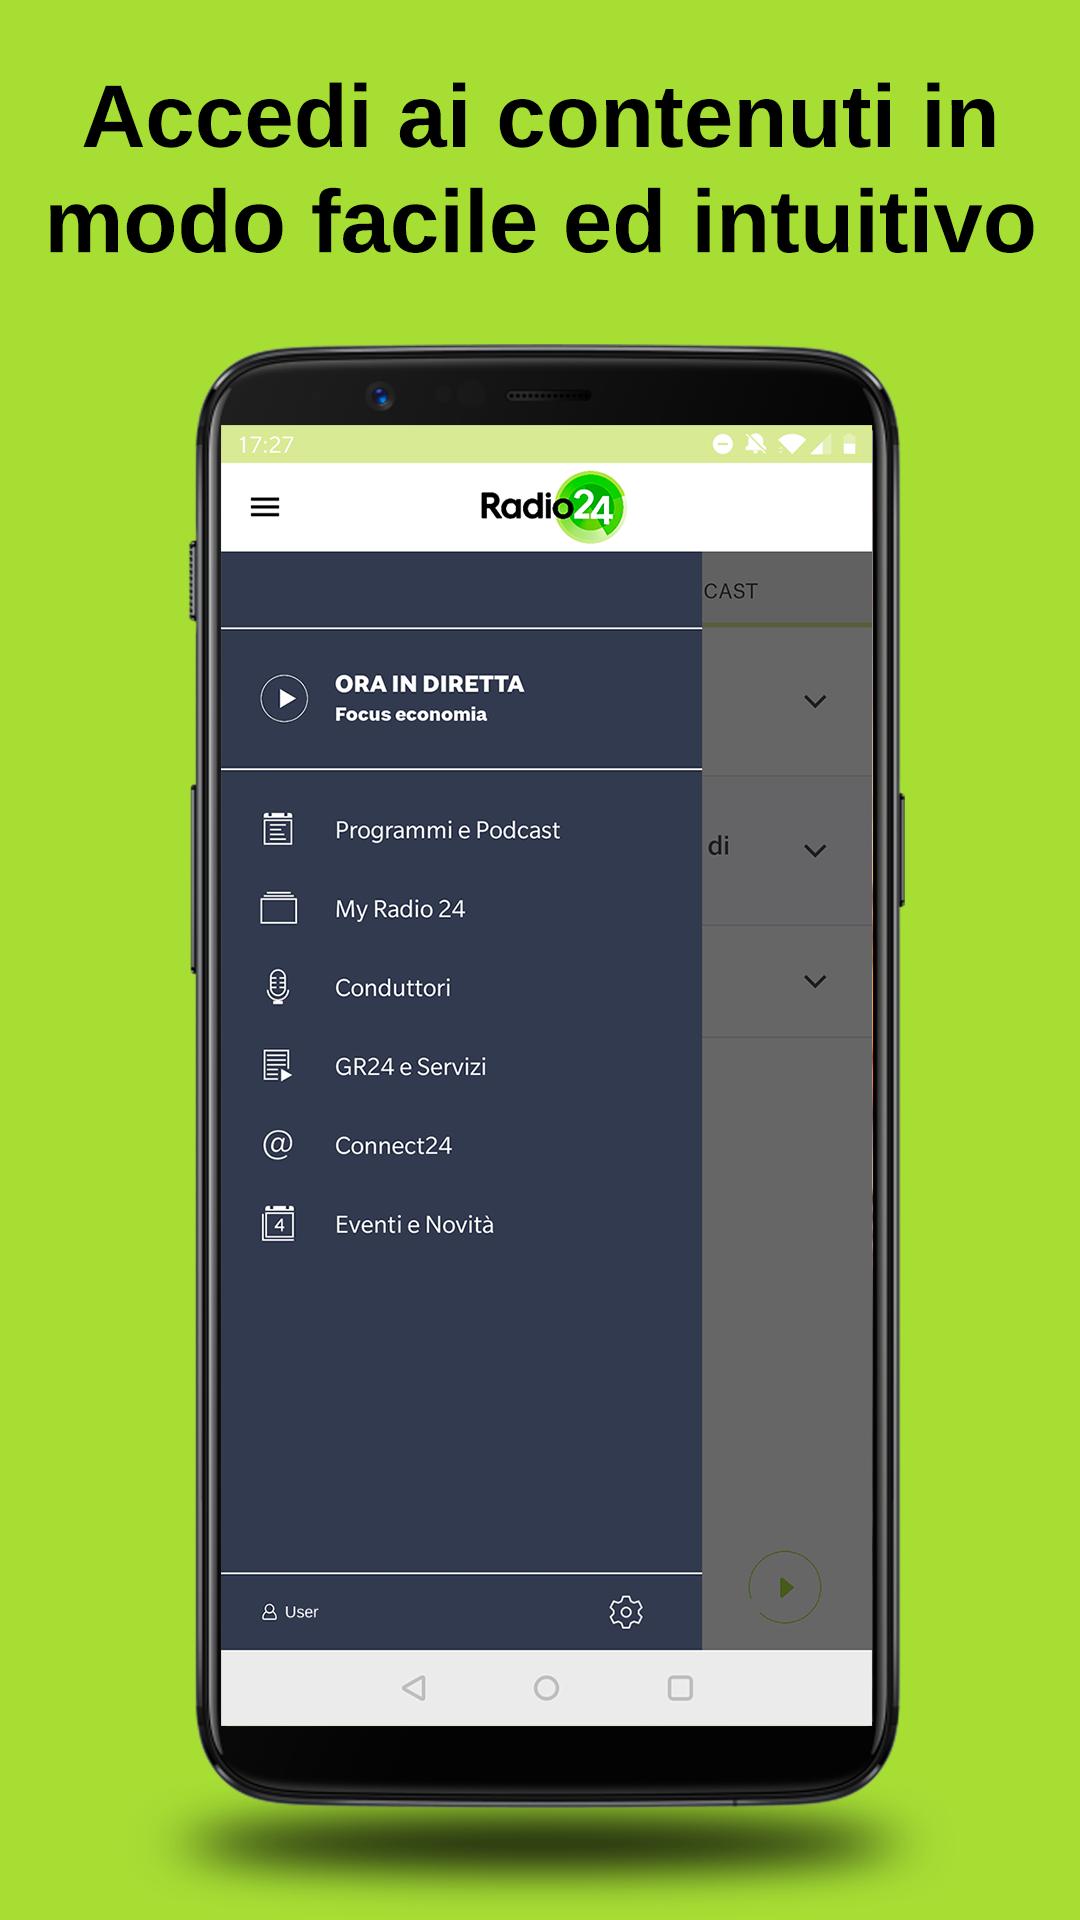 Radio24 for Android - APK Download